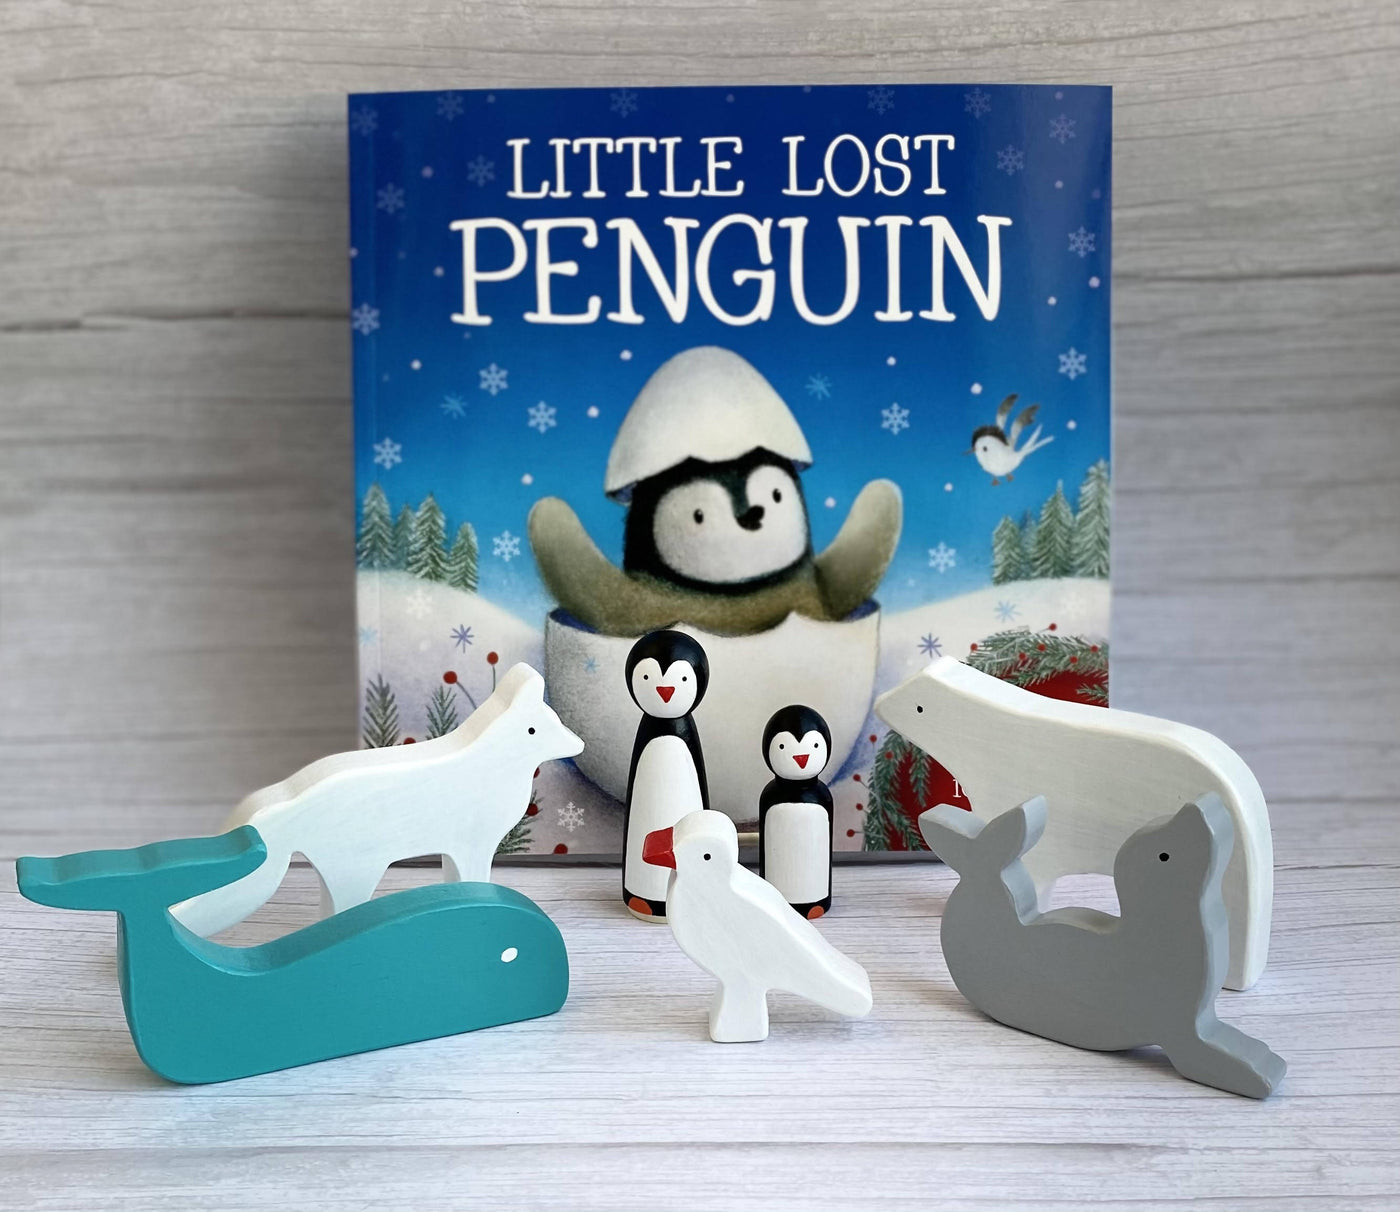 Little lost penguin story book